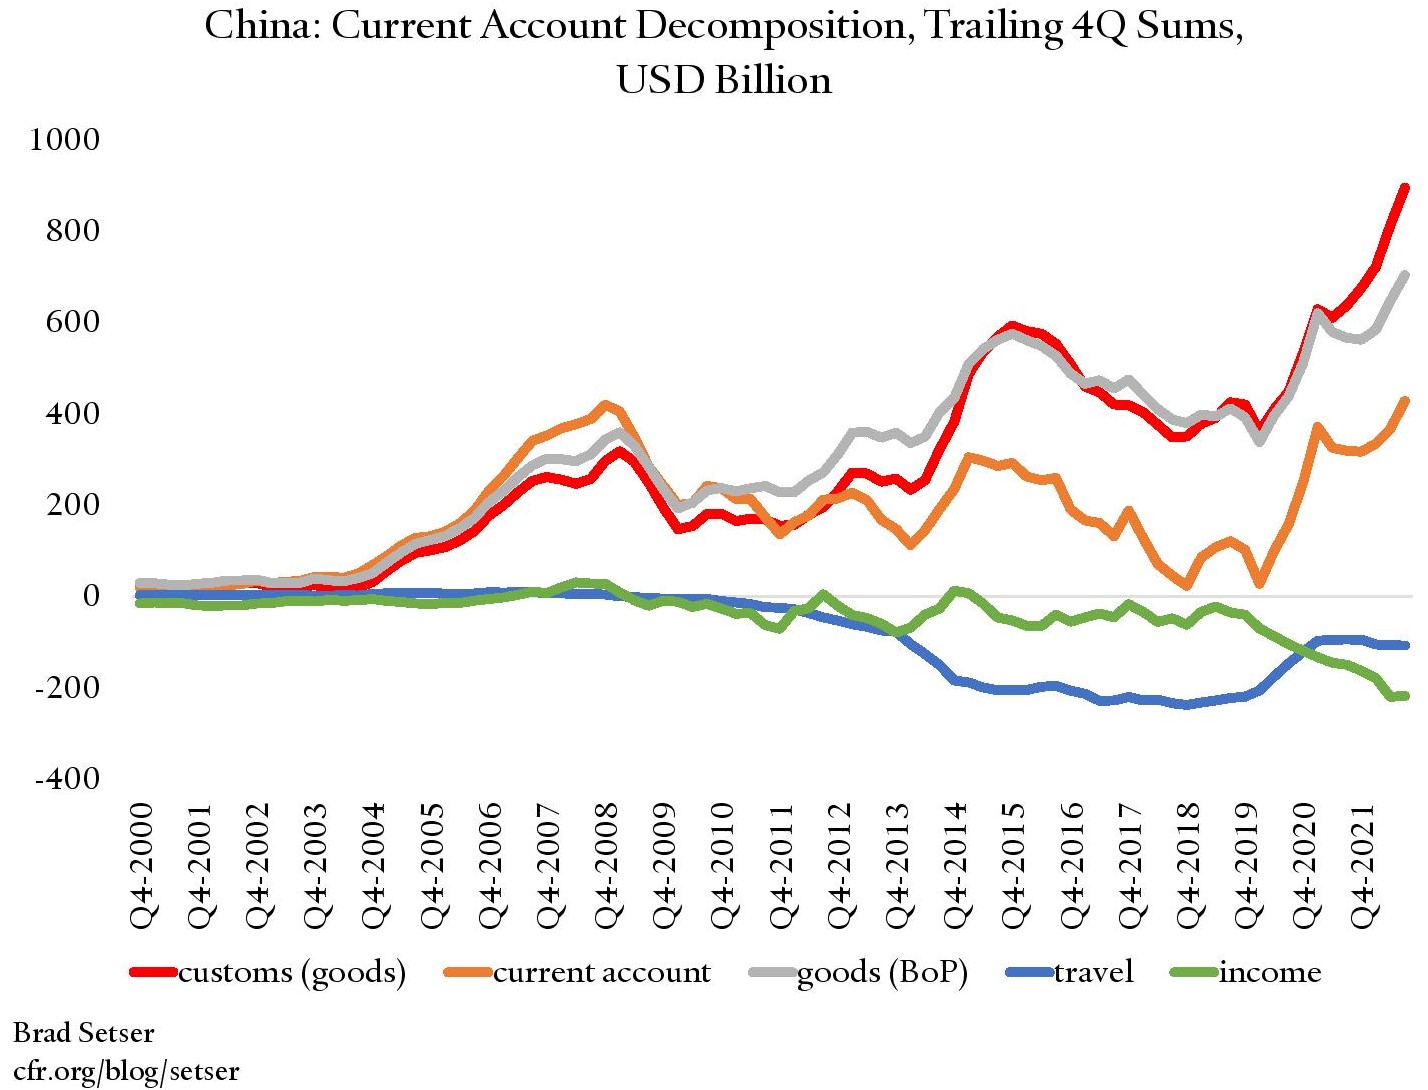 China's Balance of Payments Data Does Not Add Up